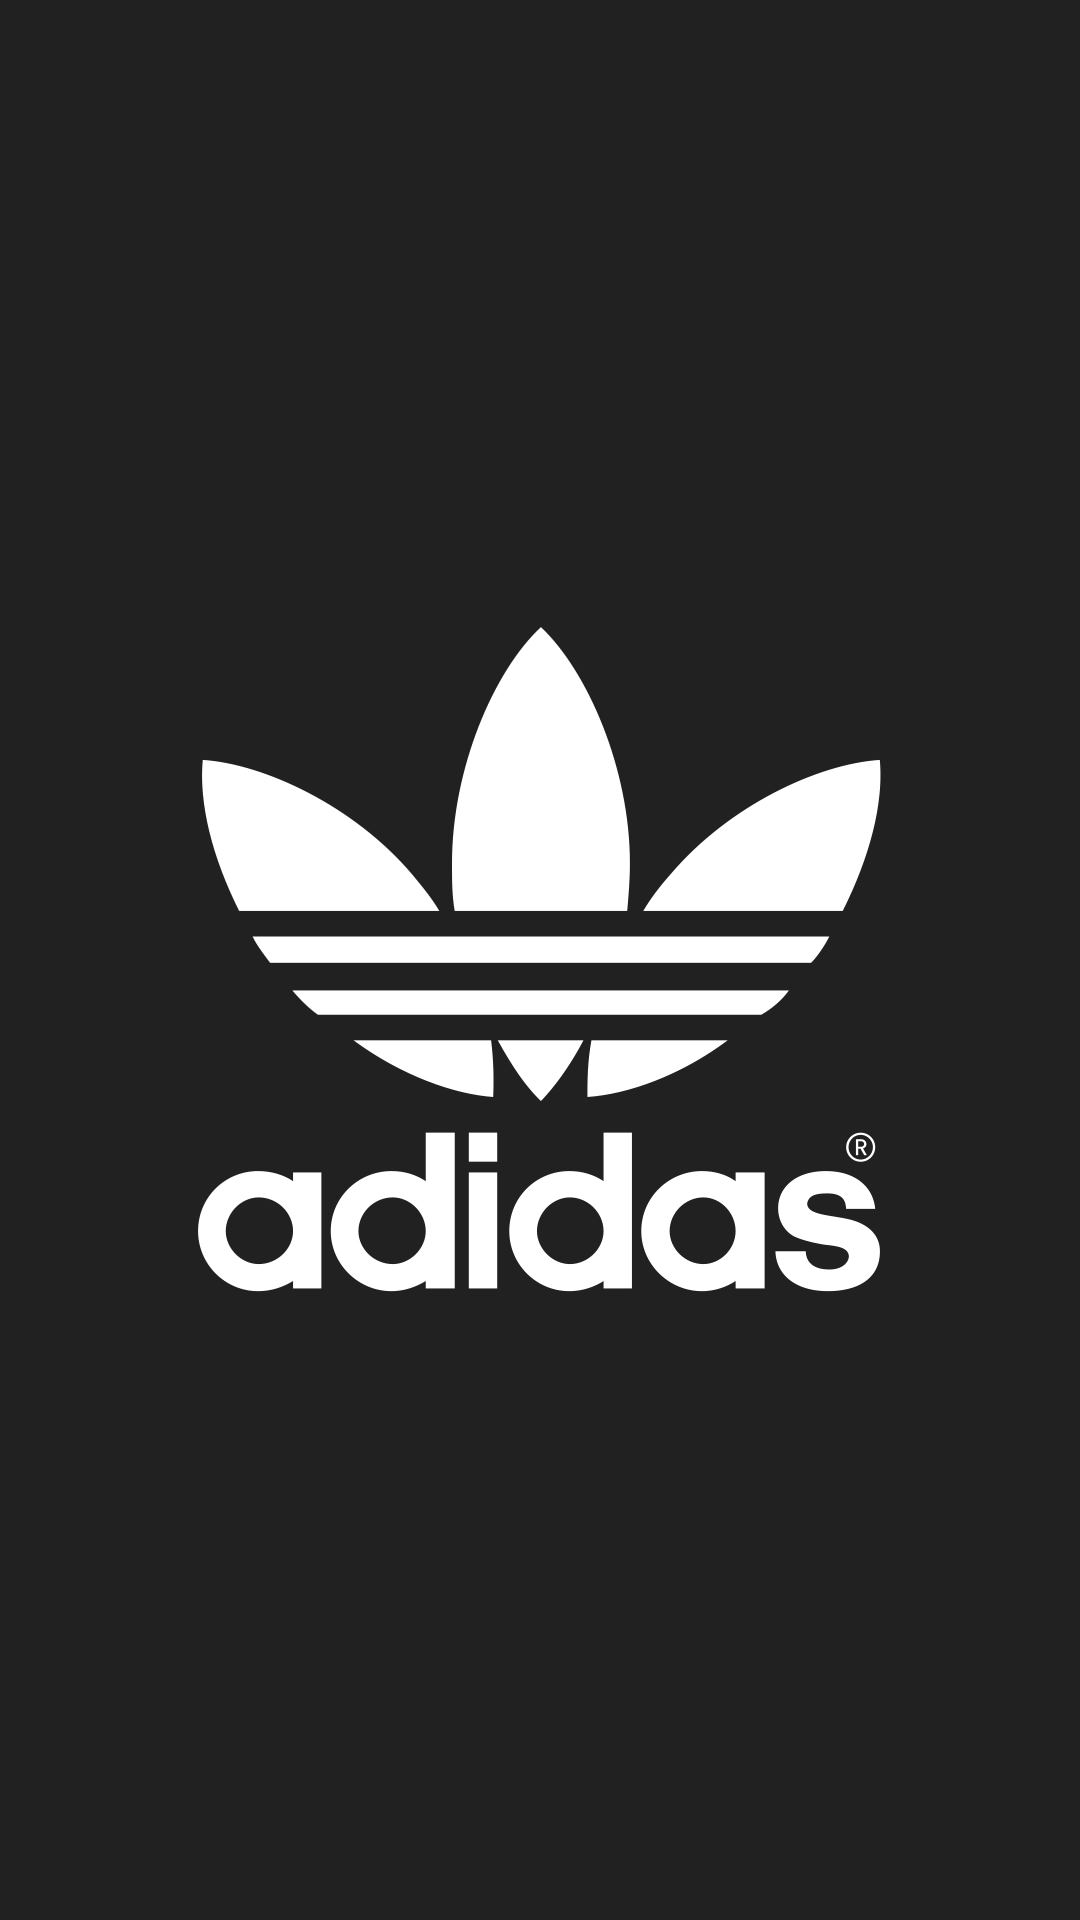 Free Download Adidas Logo10 Iphone Iphone 1080x19 For Your Desktop Mobile Tablet Explore 99 Adidas Logo Wallpaper 16 Adidas Logo Wallpaper 16 Adidas Wallpaper 16 Adidas 16 Wallpaper